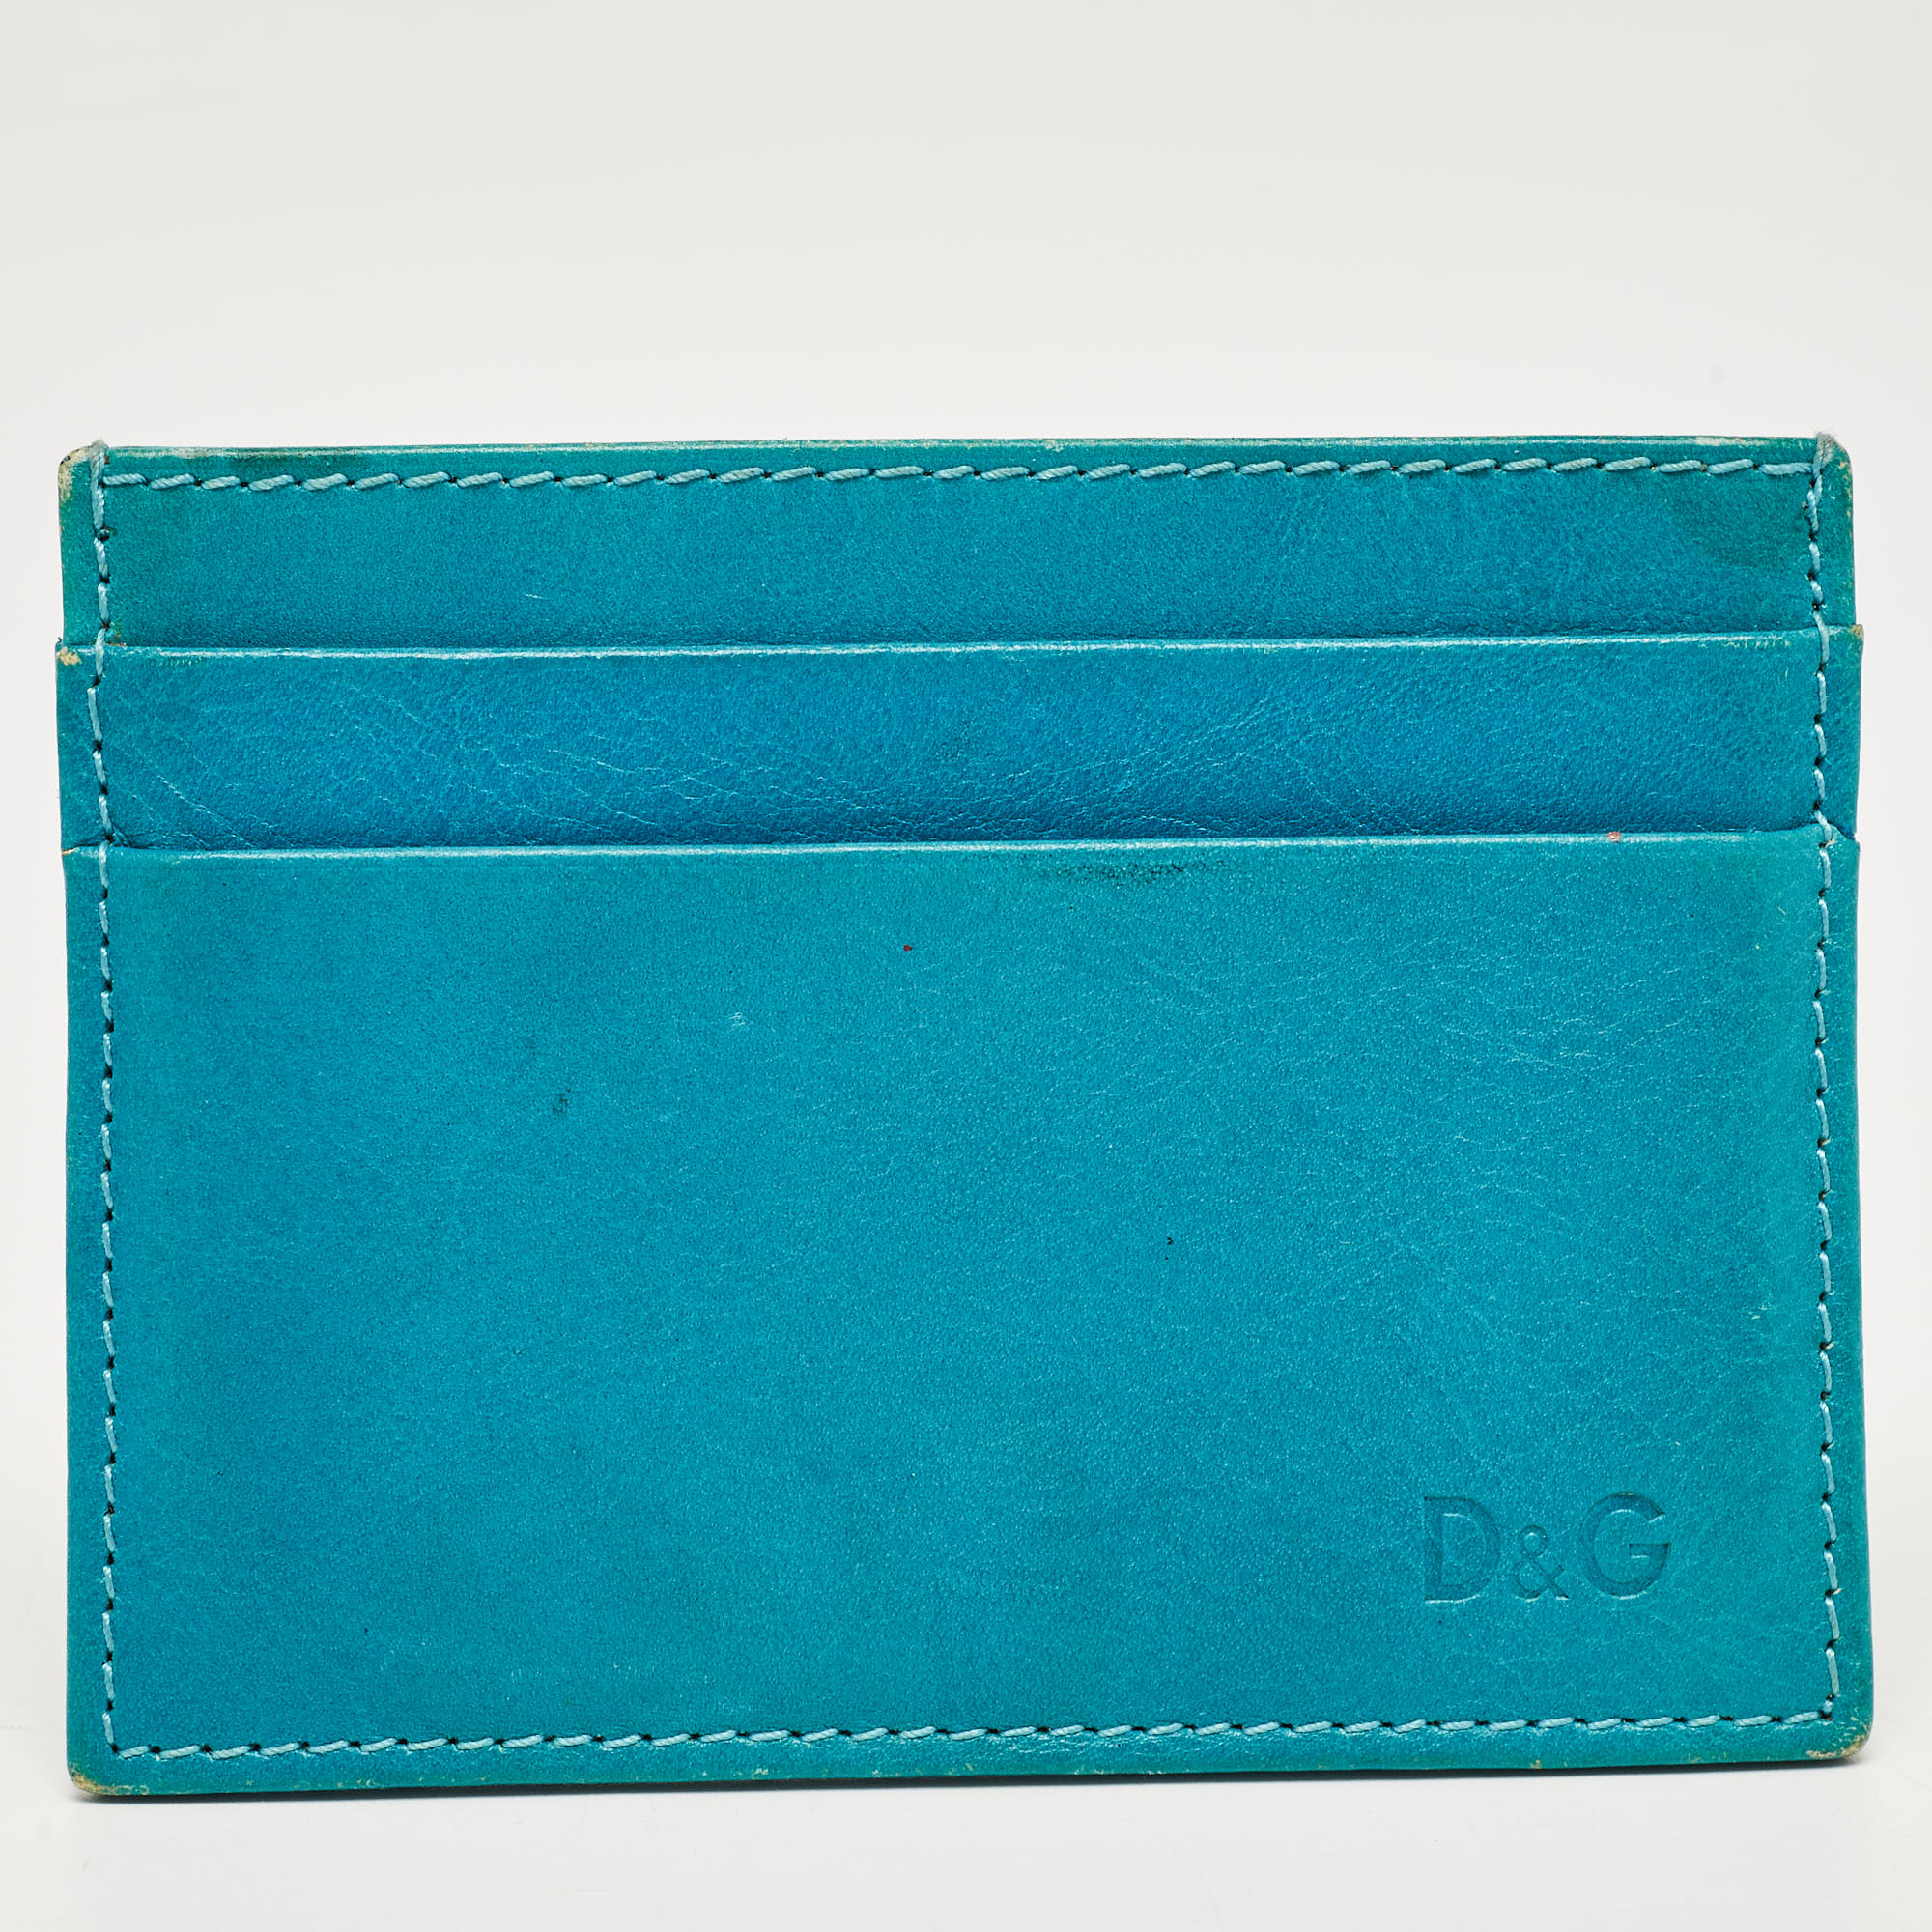 Pre-owned D & G Turquoise Blue Leather Card Holder